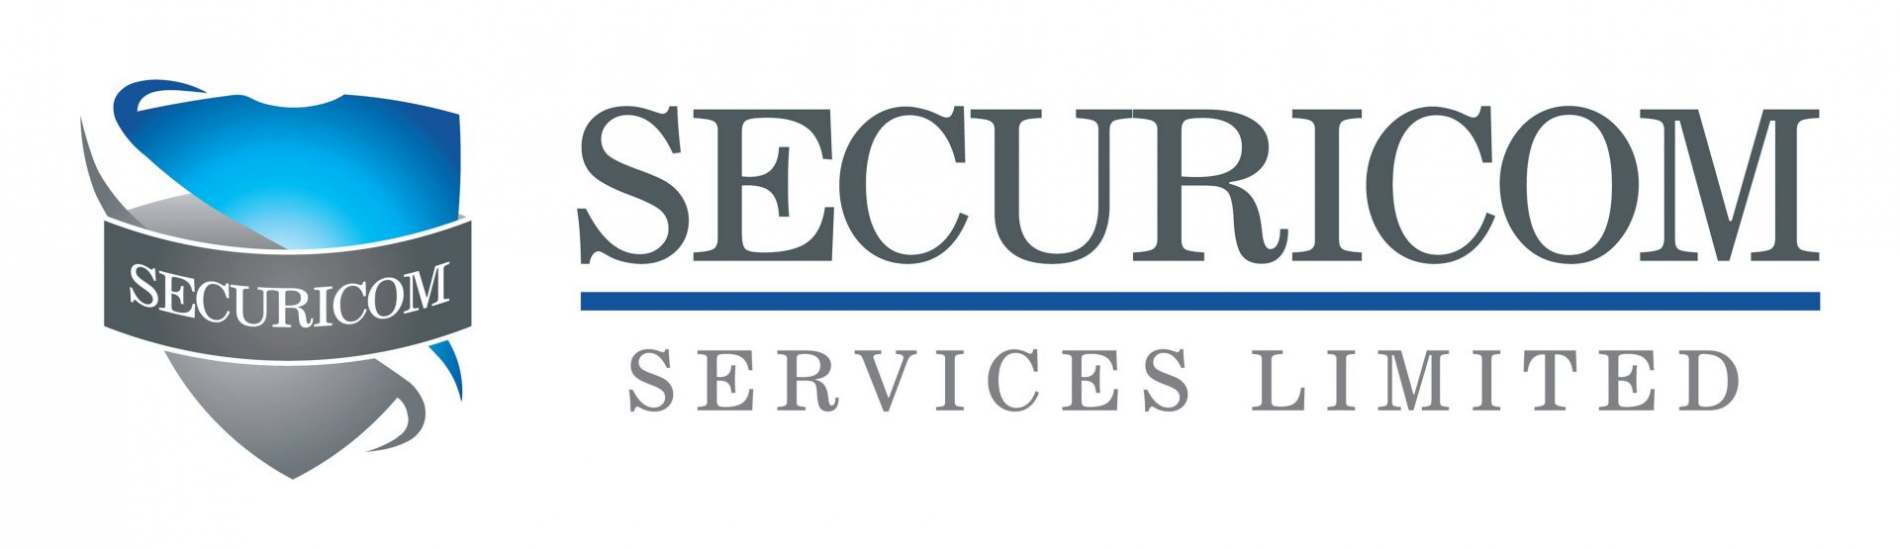 Security & protective systems from Securicom Services Ltd in Great Yarmouth